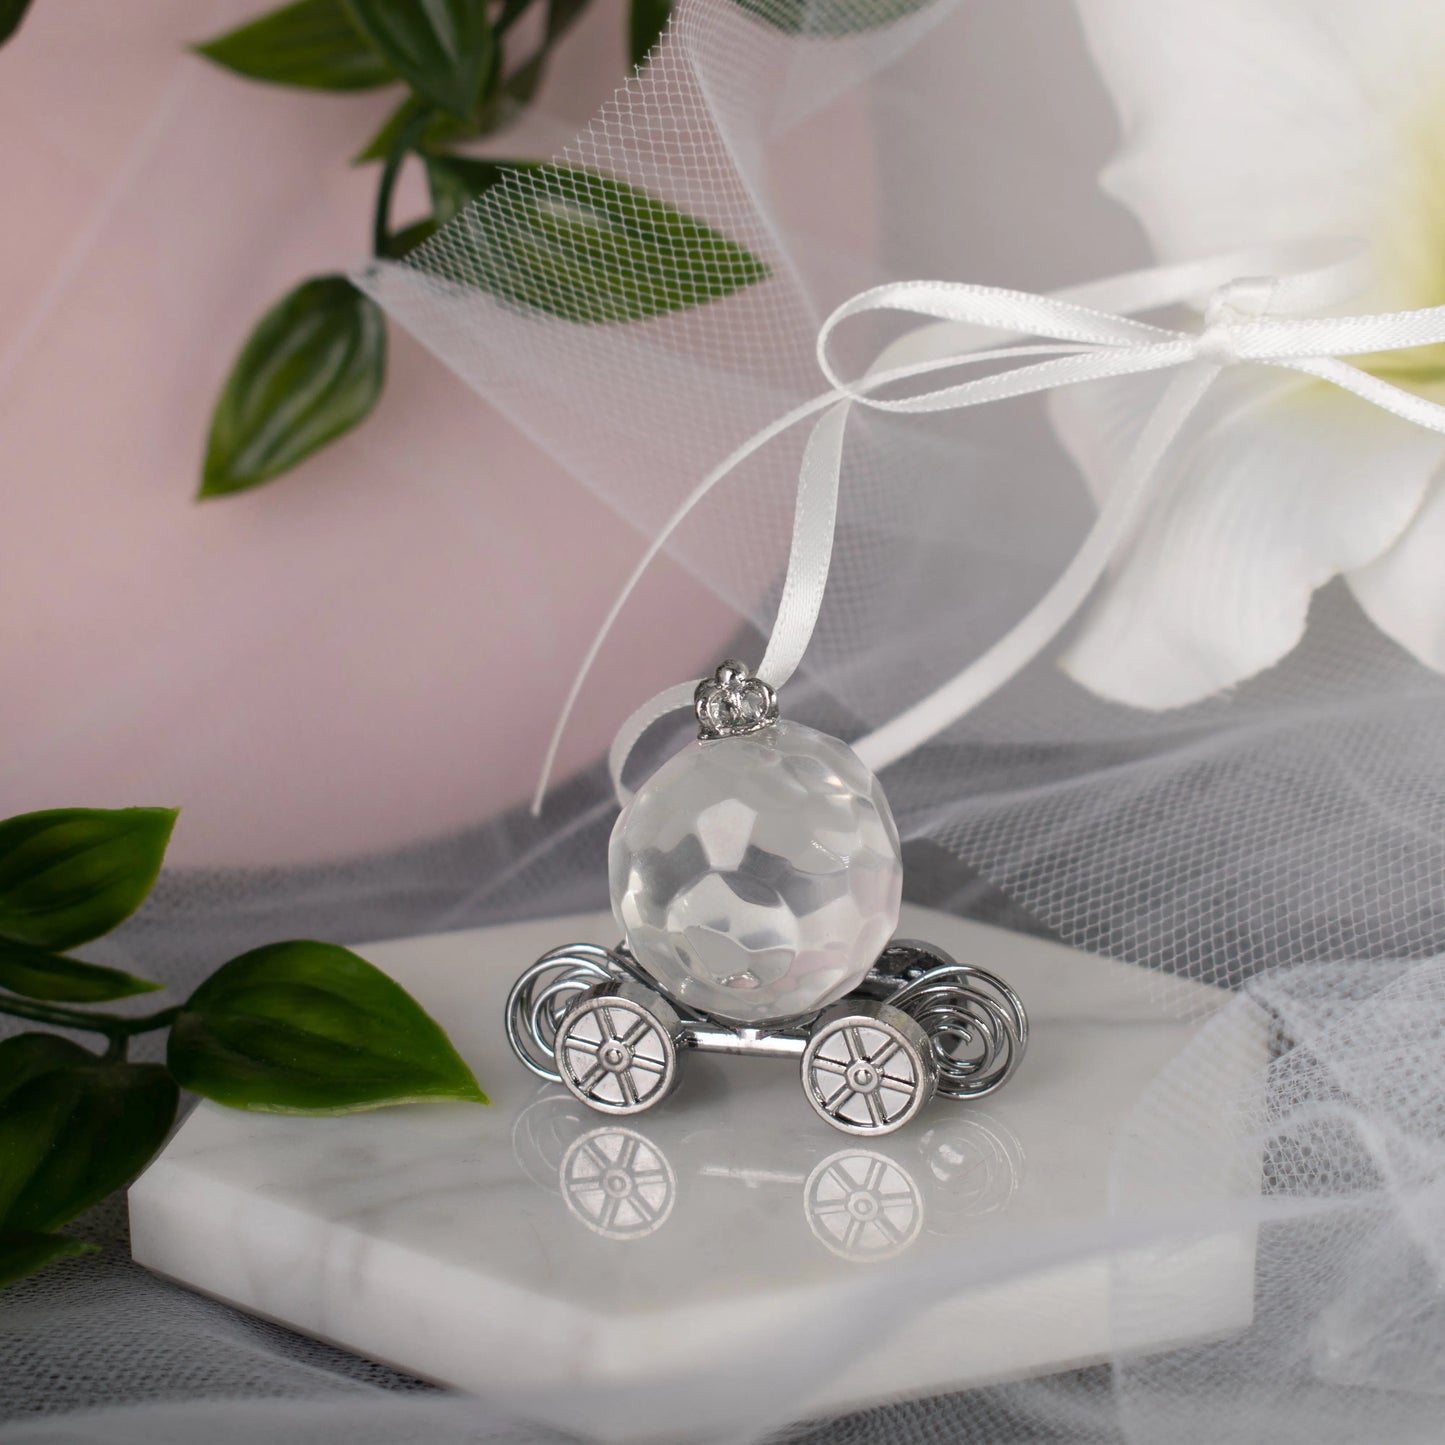 Close-up of the Cinderella Carriage Wrist Charm, an enchanting wedding charm with intricate details and elegant design.